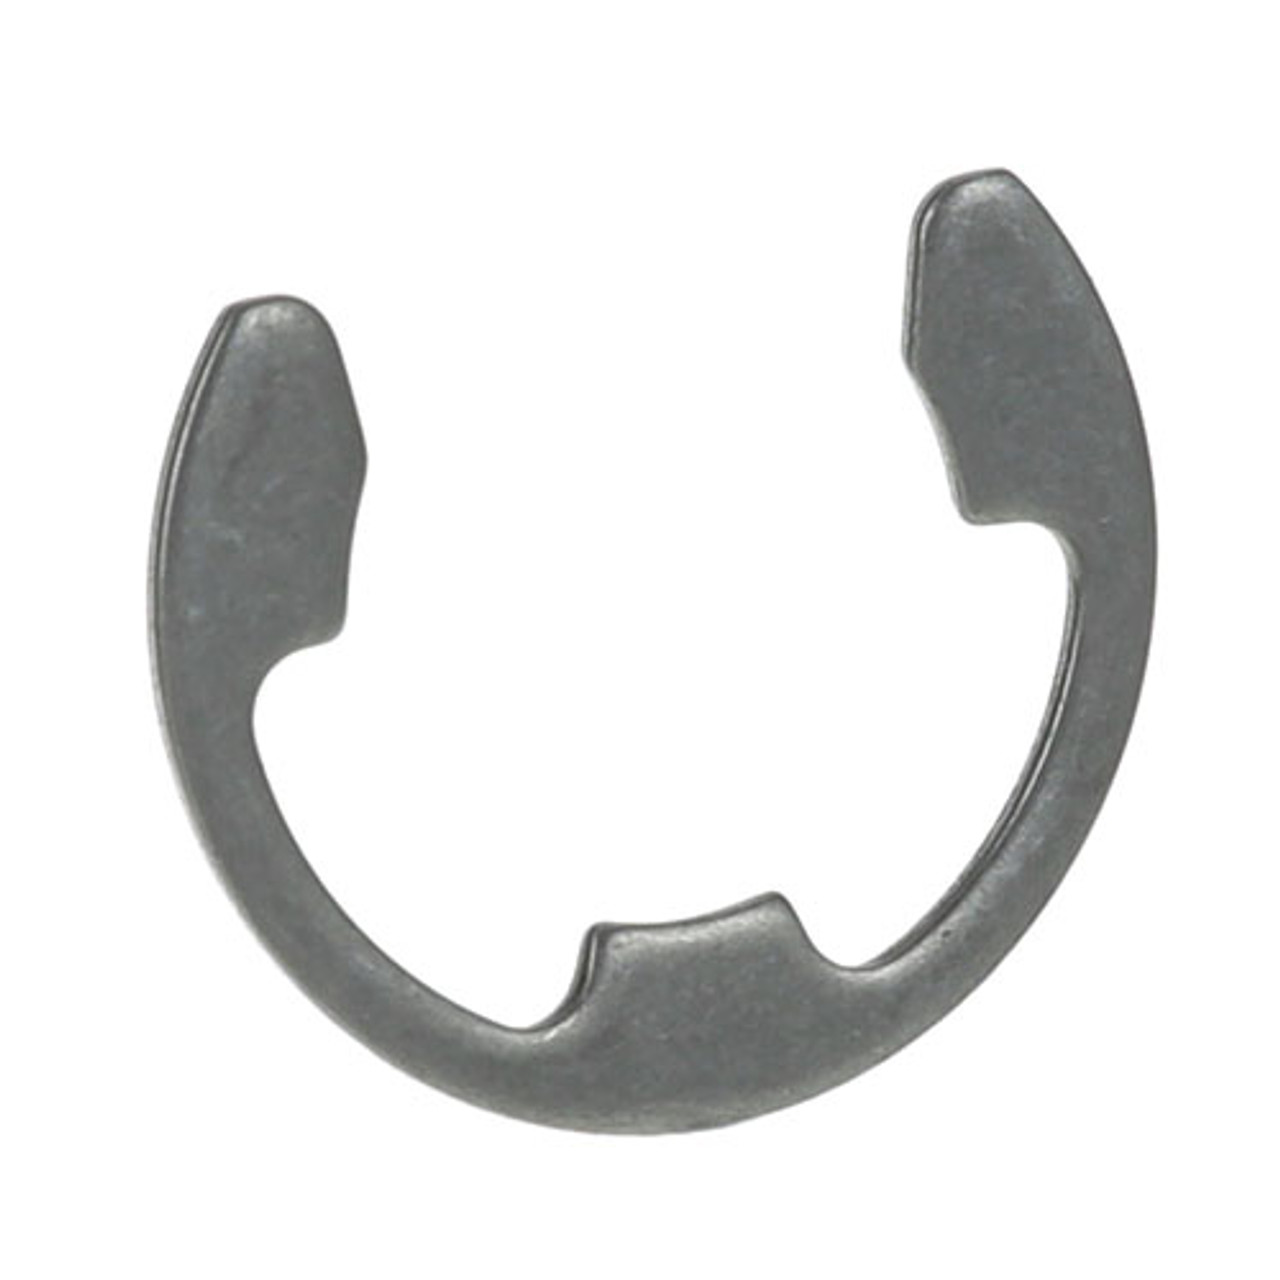 E-Clip - Replacement Part For Hobart RR-010-13